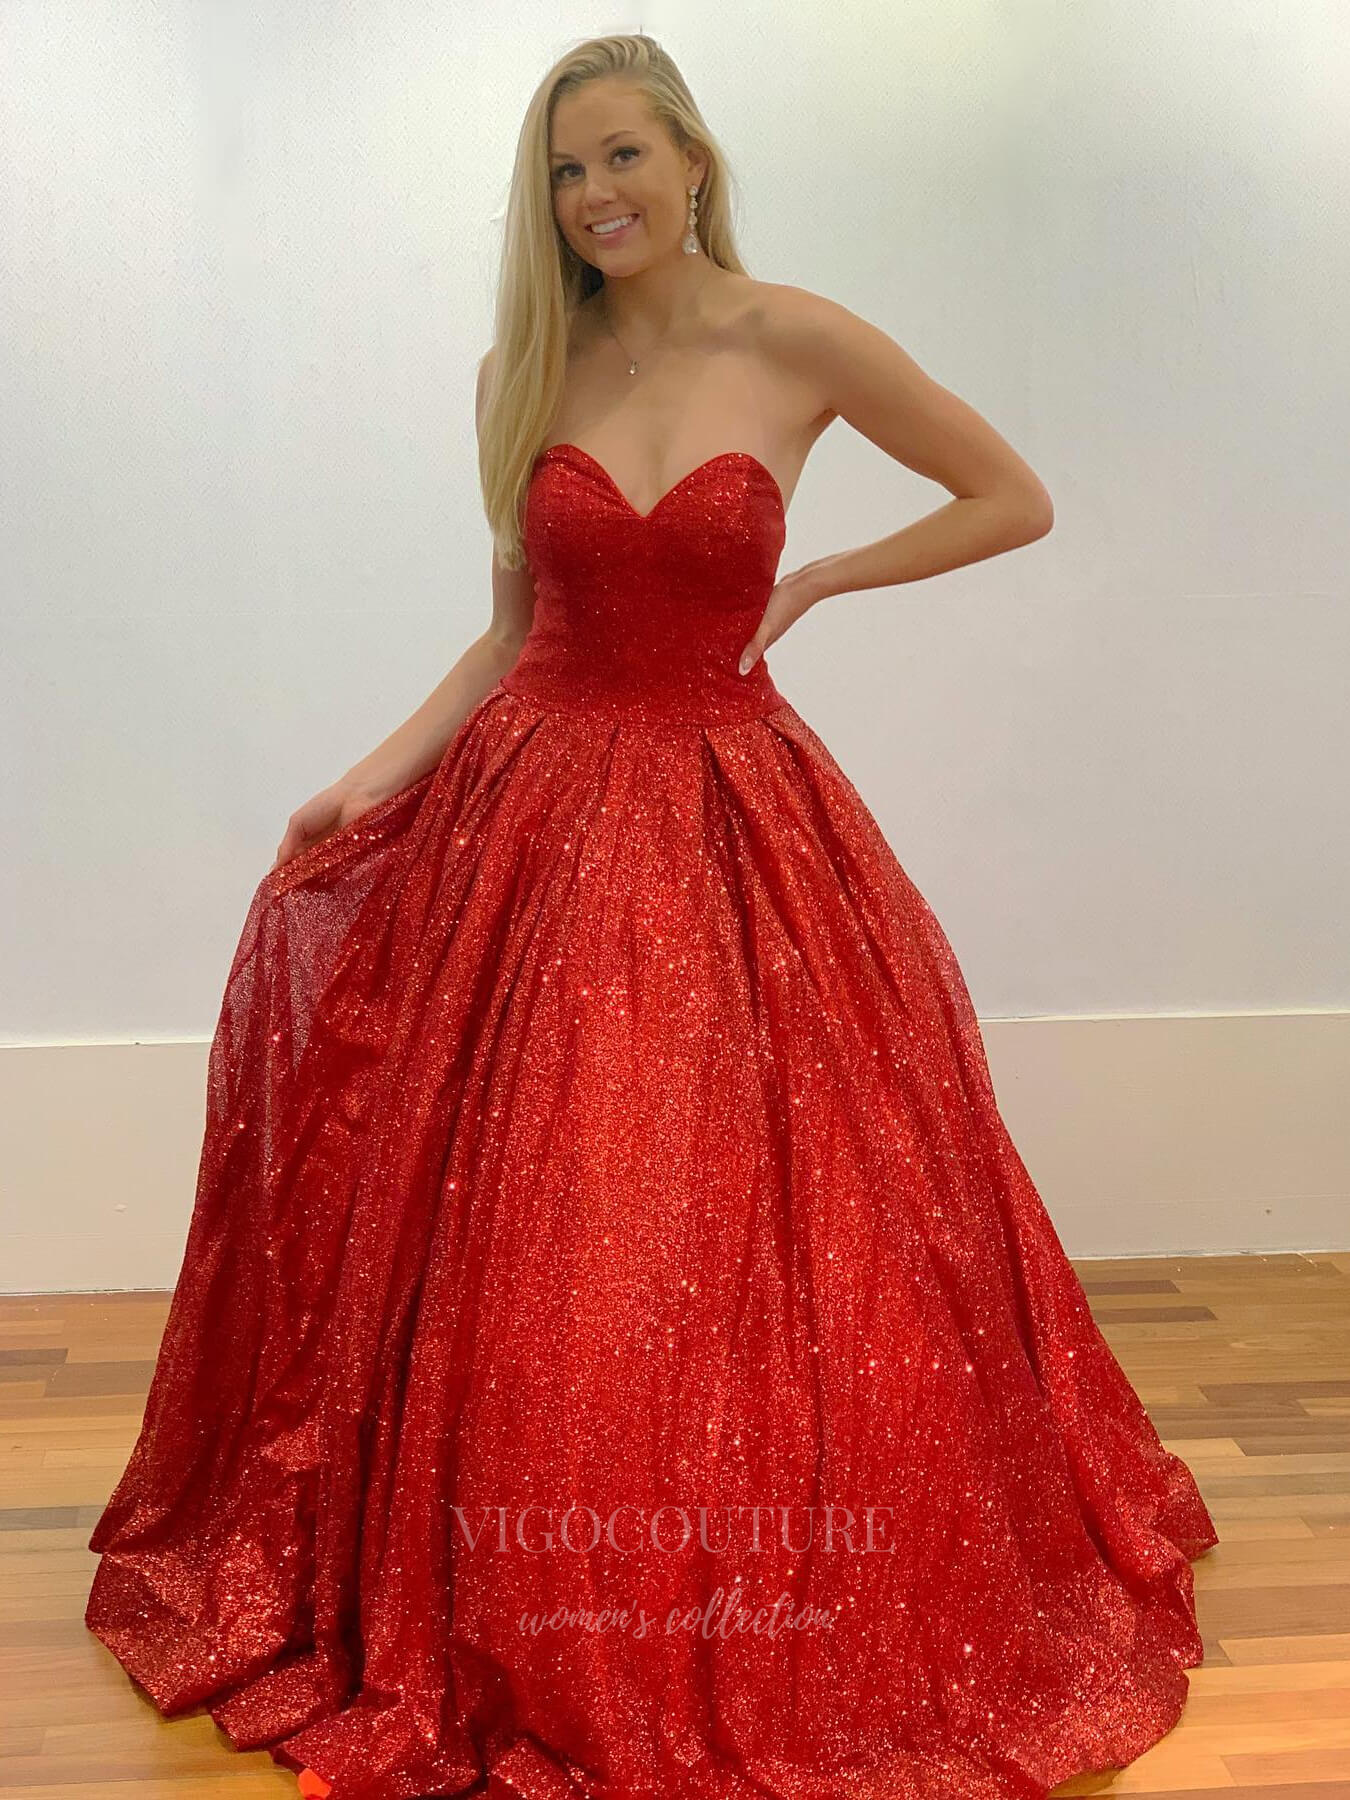 vigocouture-Red Sparkly Lace Strapless Prom Dress 20967-Prom Dresses-vigocouture-Red-US2-